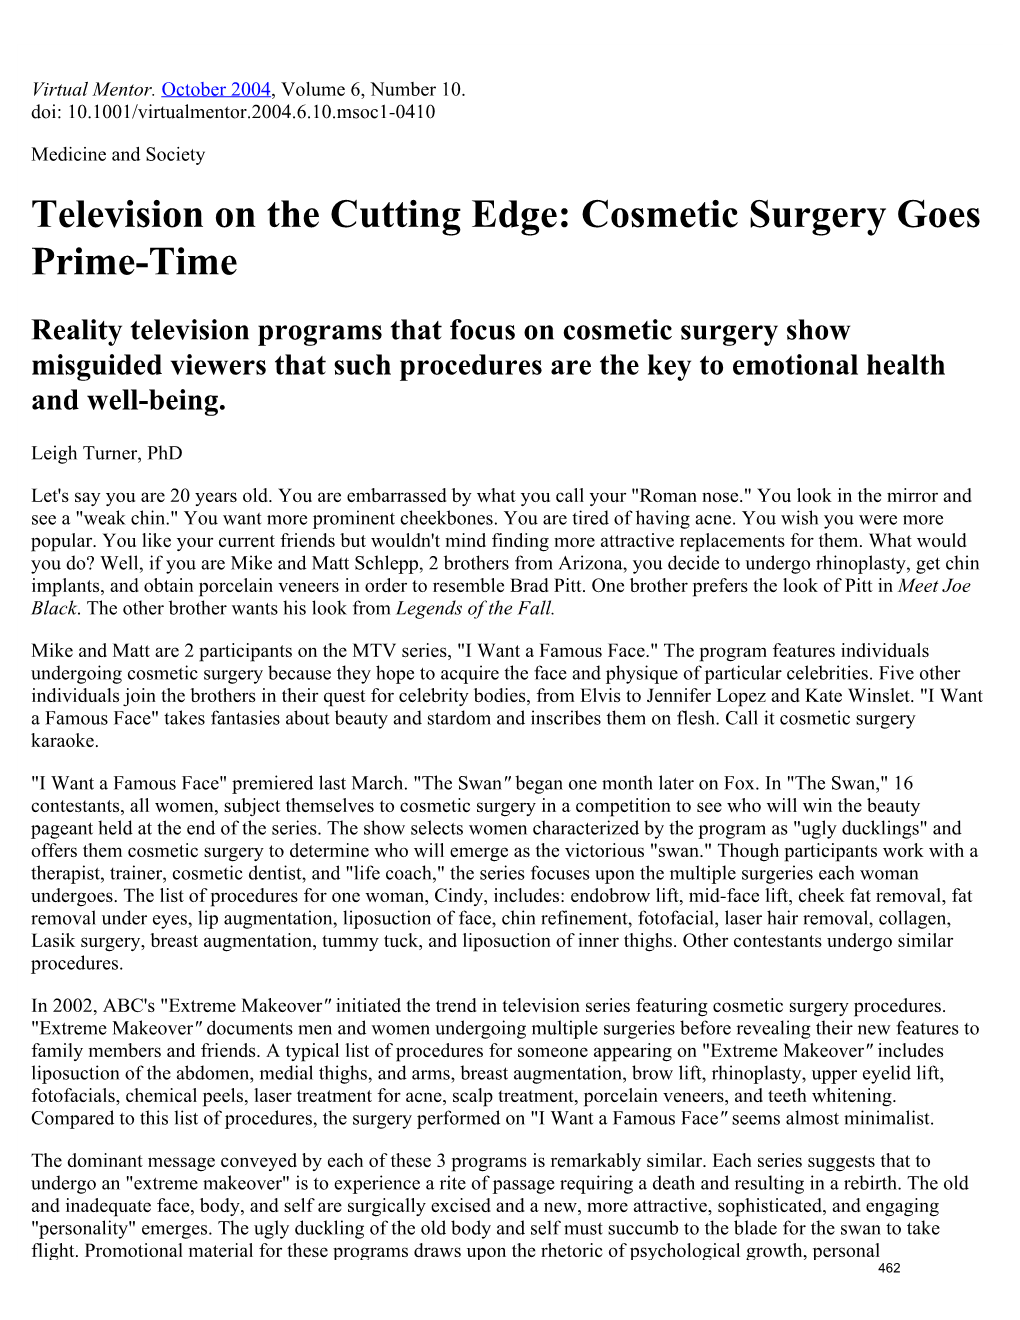 Television on the Cutting Edge: Cosmetic Surgery Goes Prime-Time